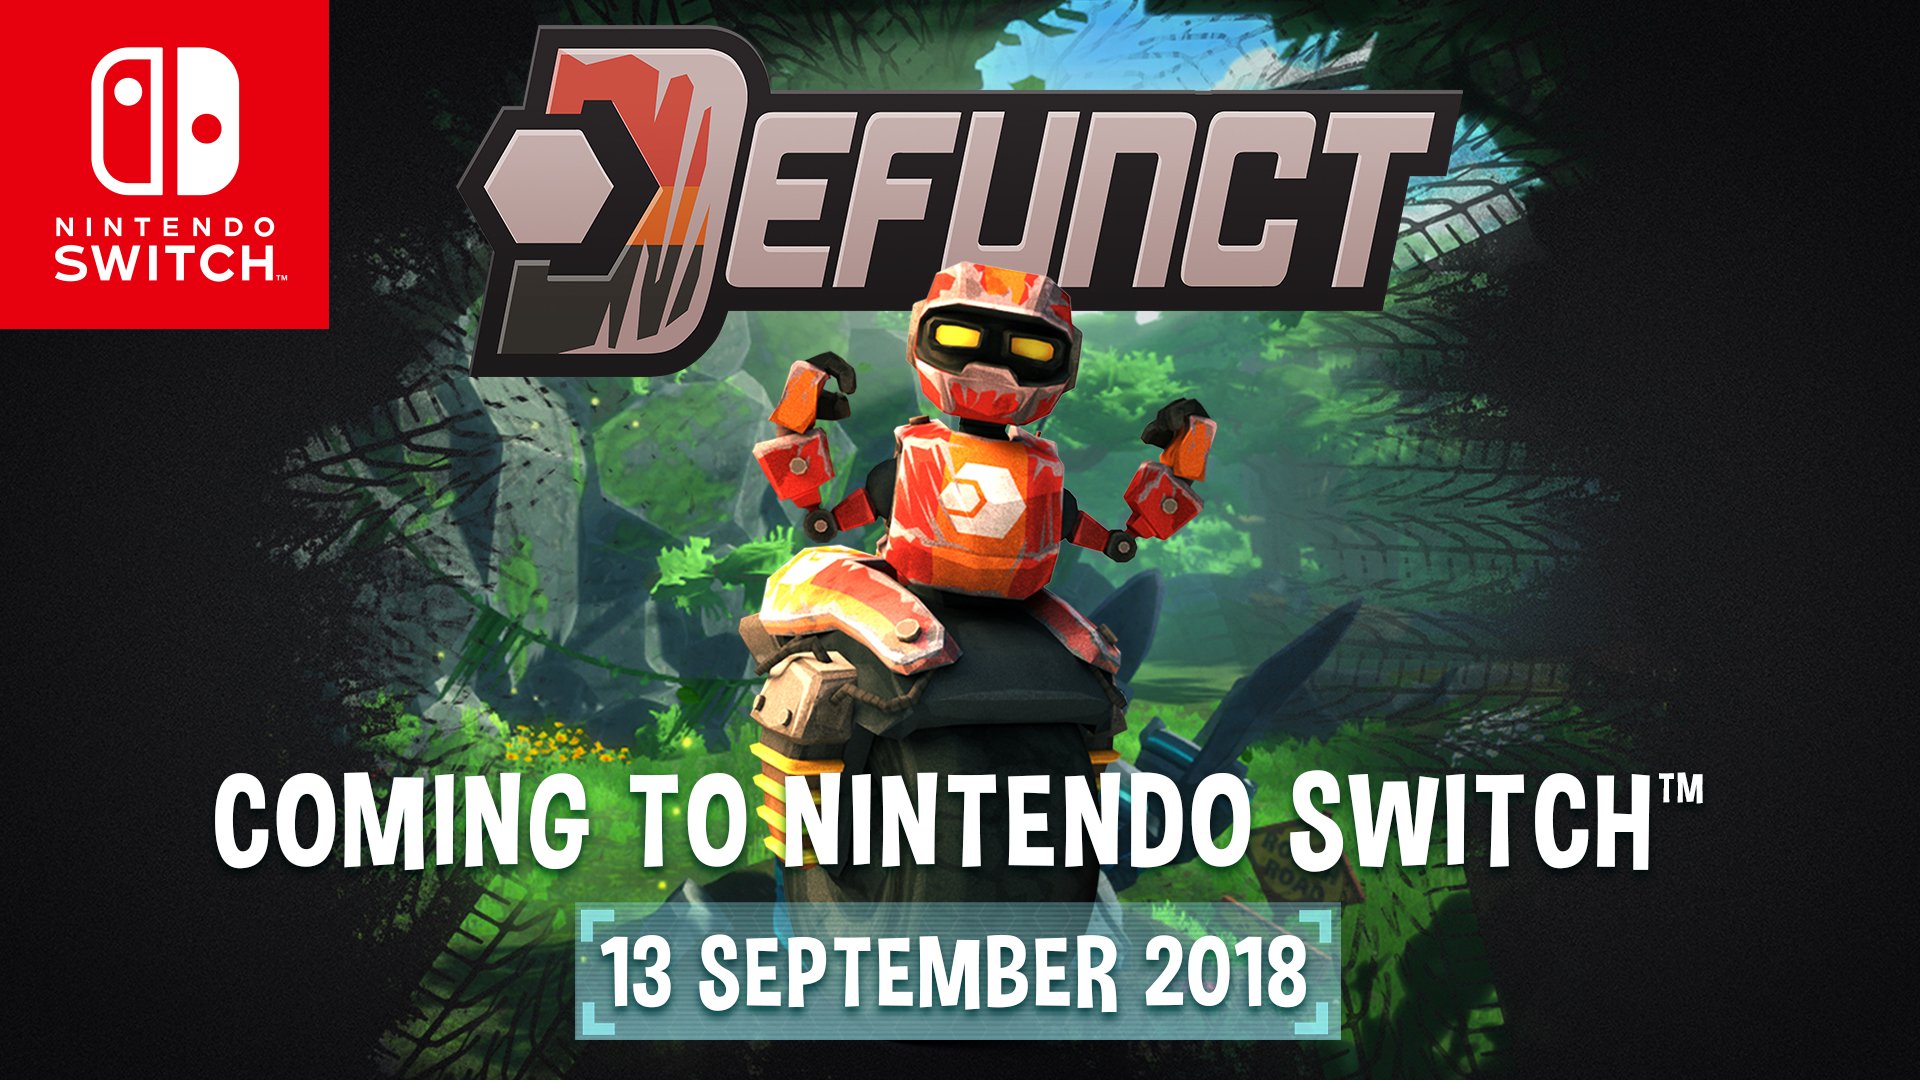 SOEDESCO on Twitter: "#Defunct is coming to #NintendoSwitch! On